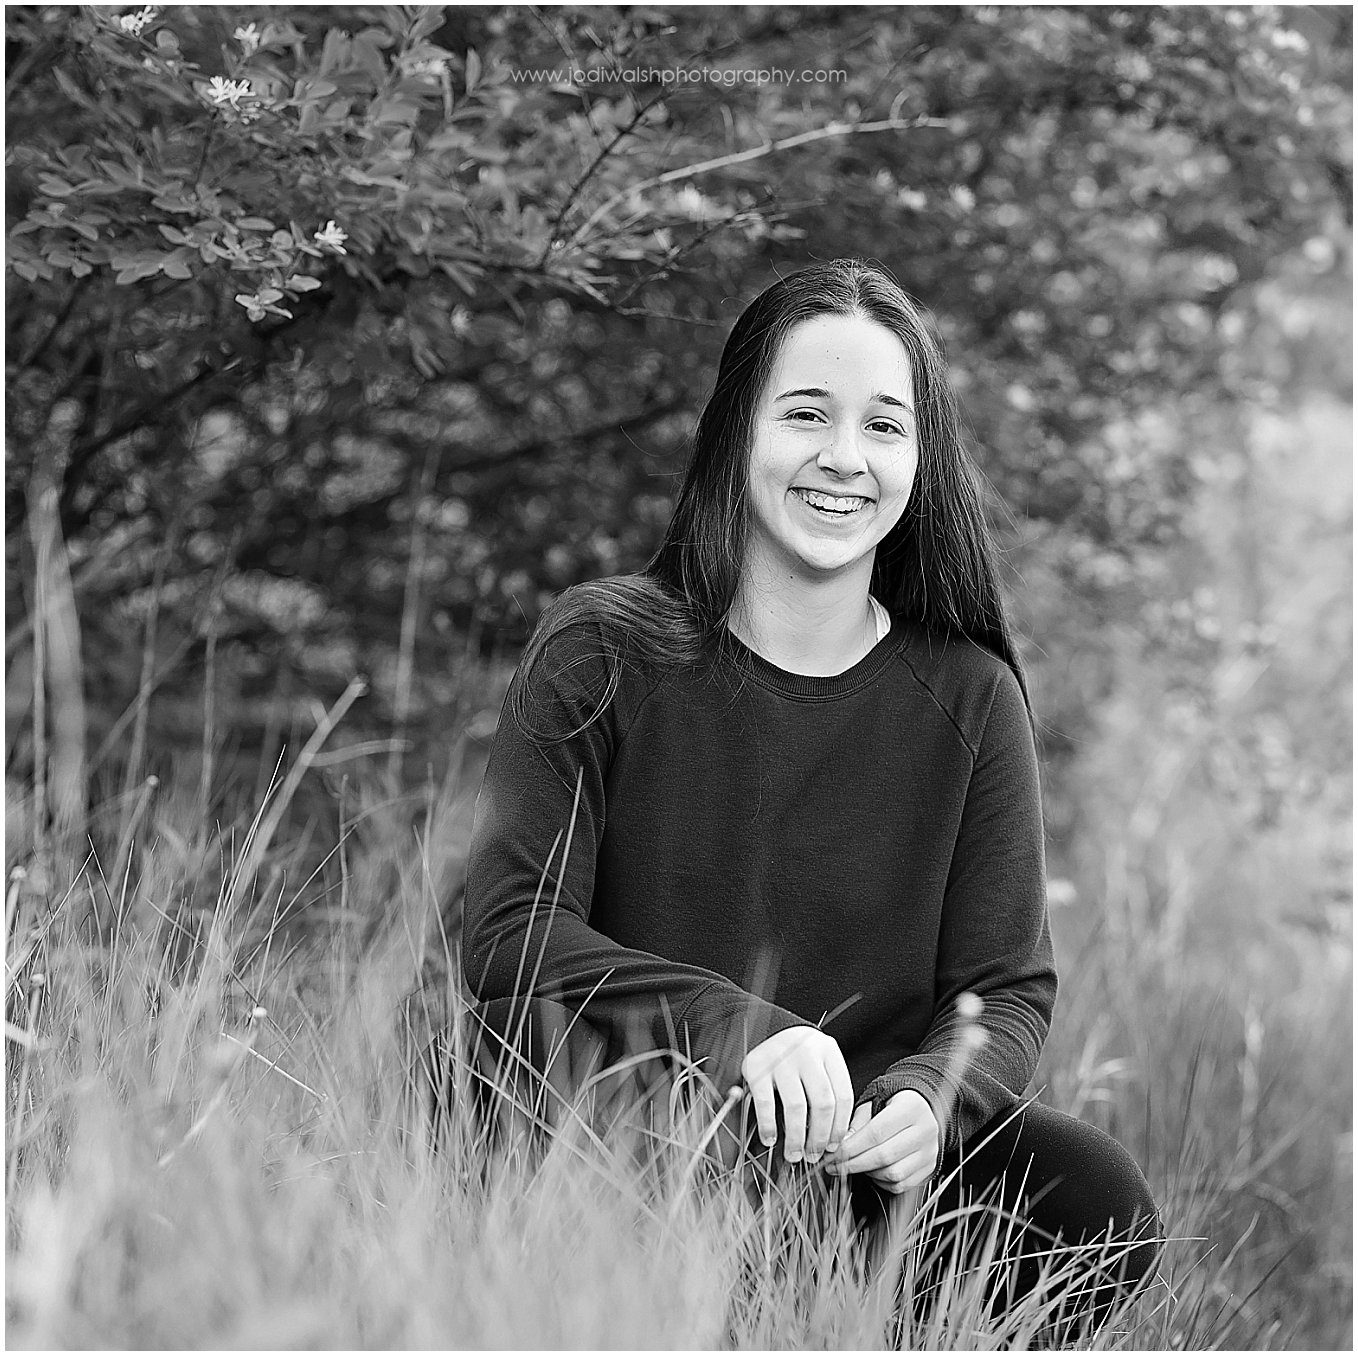 black and white image of a teen girl sitting in tall grasses smiling